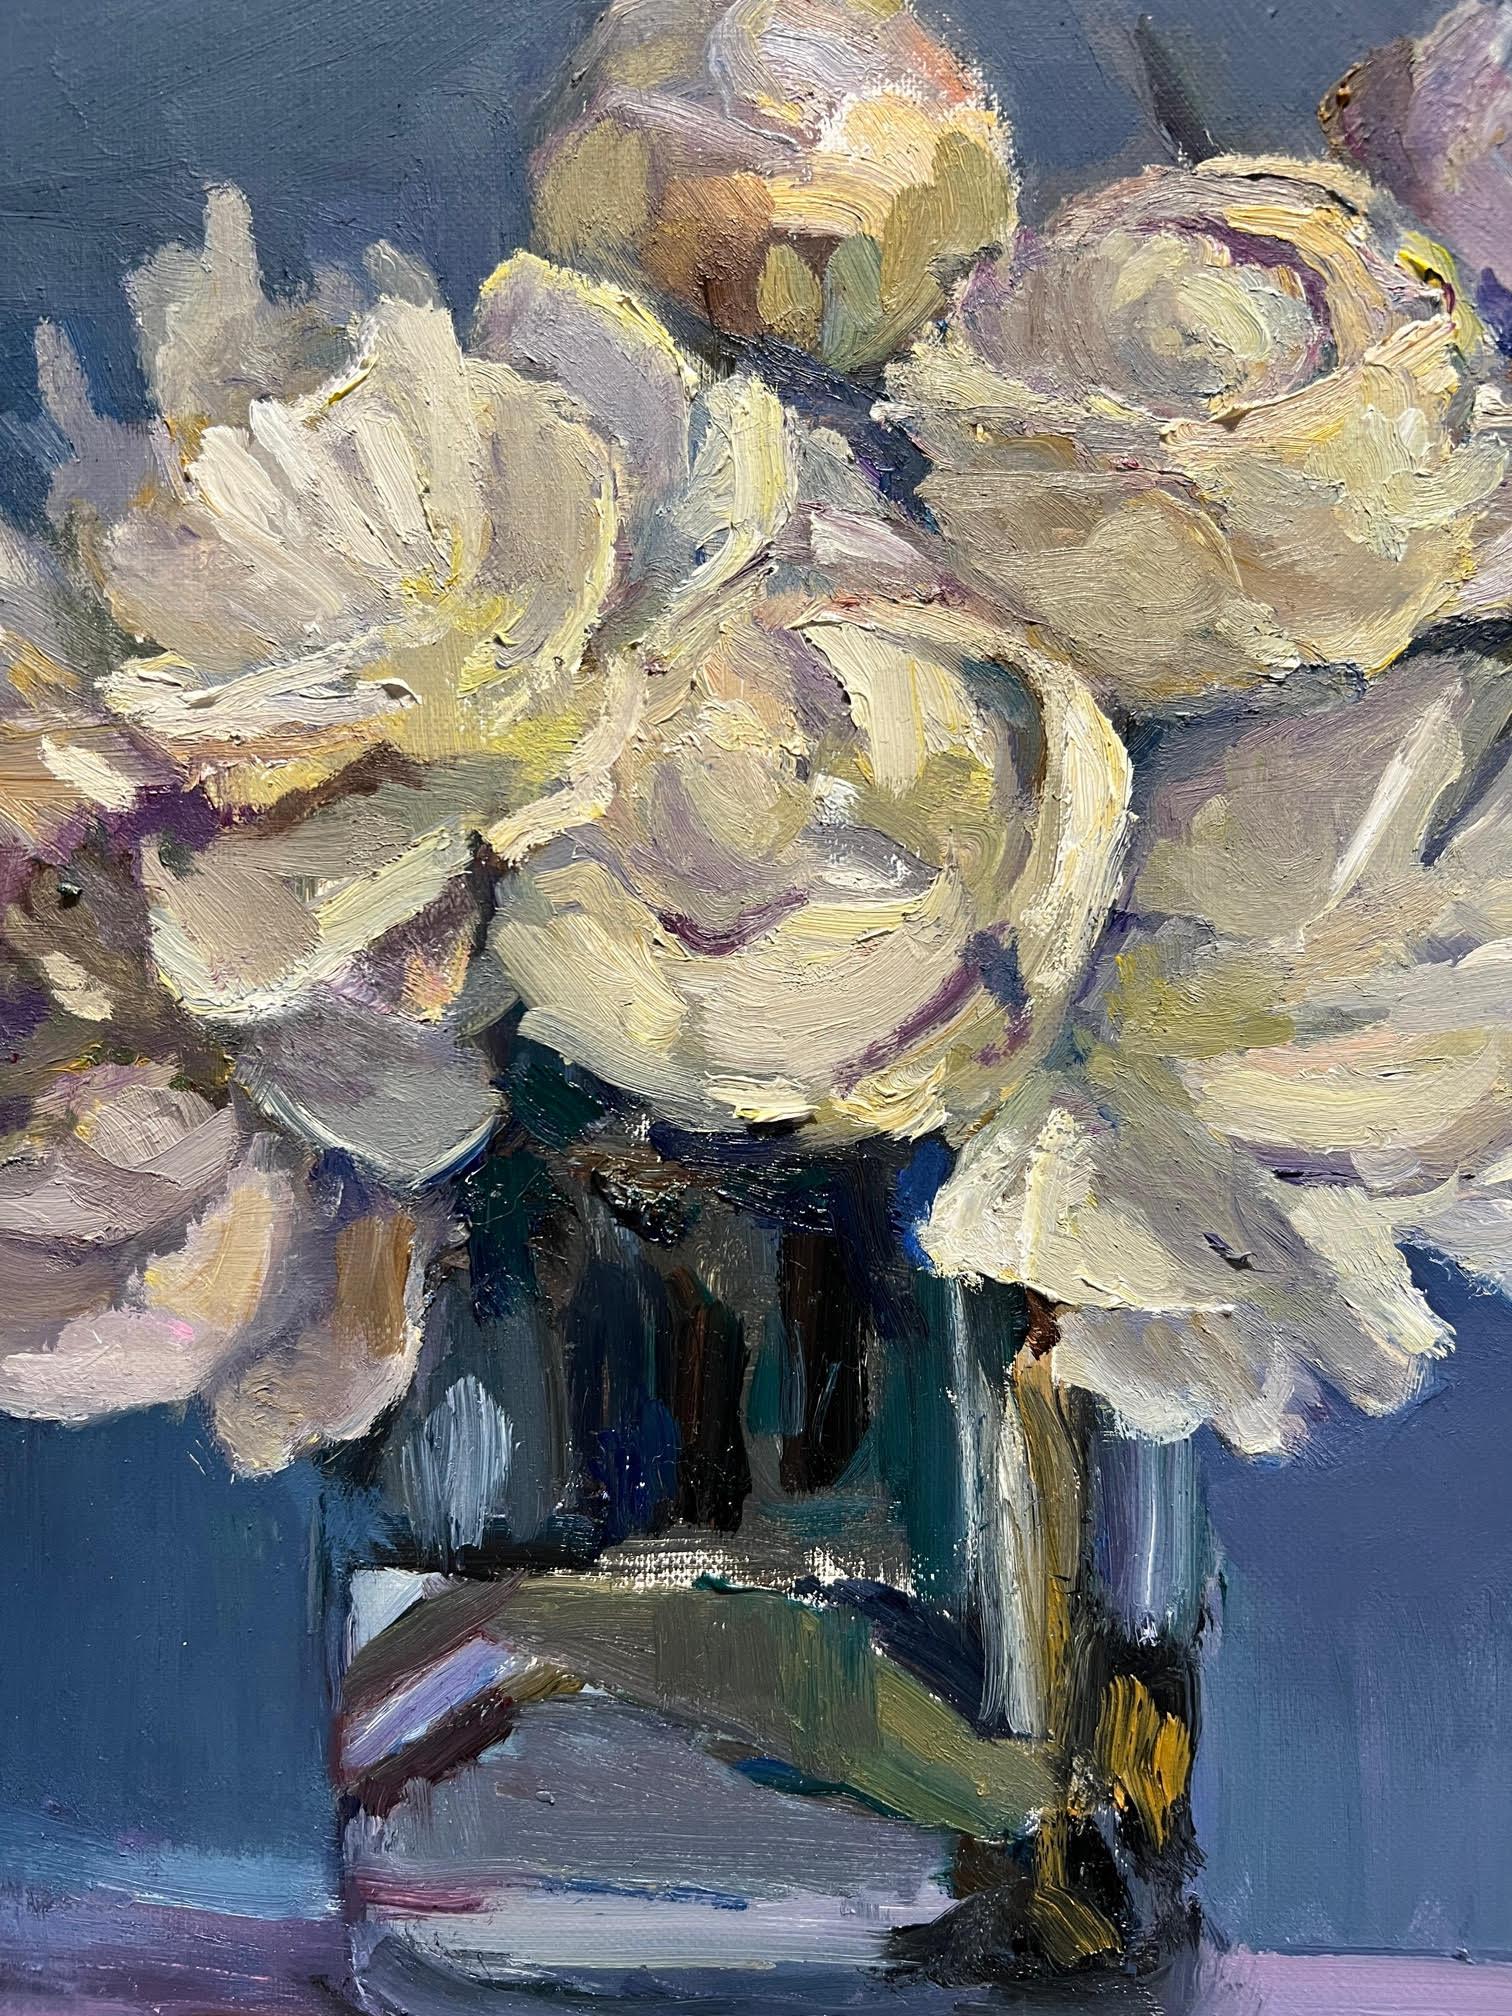 A still life of peonies in a world of purple. Lucas plays with the reflections and distortions in the clear vase. 

Framed dimensions: 13 x 13 inches

Artist Bio
Maryann Lucas lives and works in Sag Harbor. She is primarily self-taught but has also